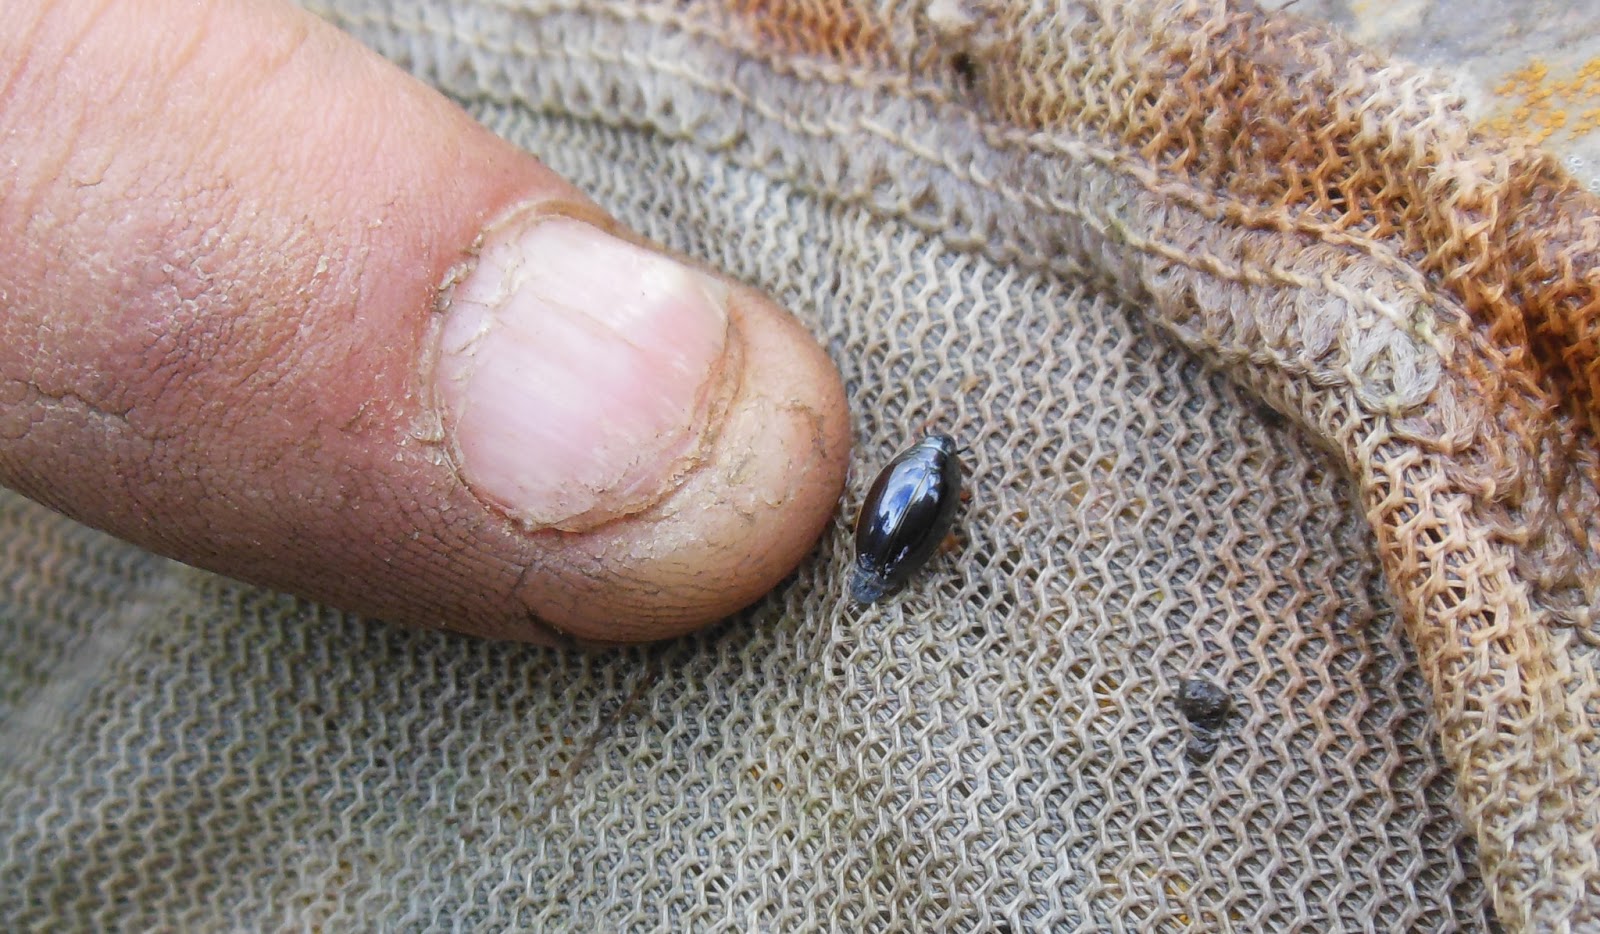 The Tenacious Gardener!: Willow water and unknown pond bugs.